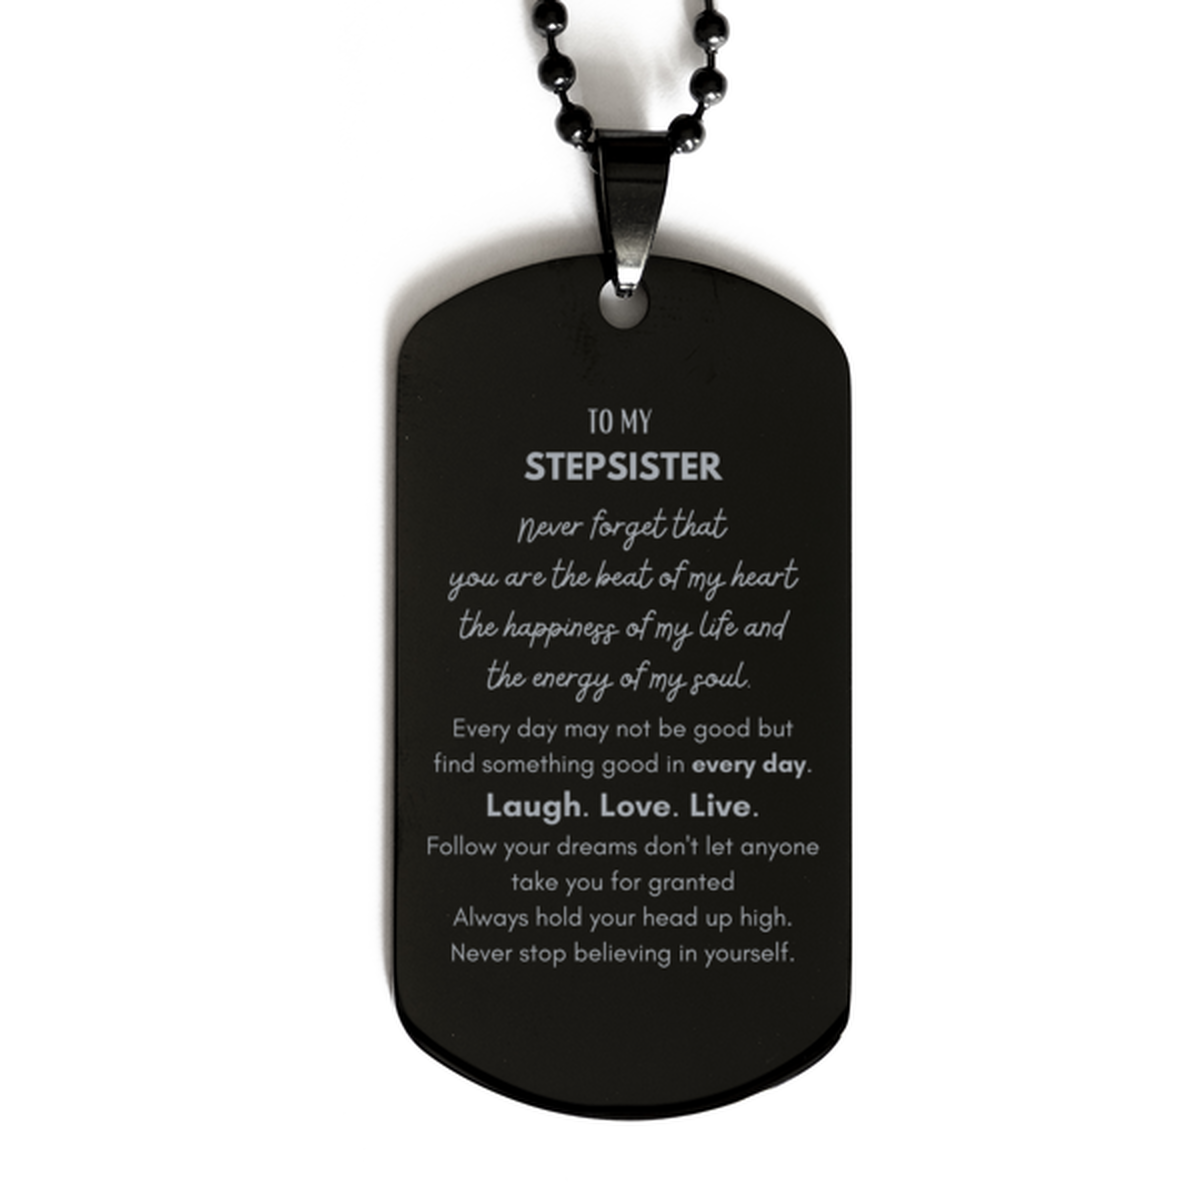 To My Stepsister Dogtag Gifts, Christmas Stepsister Black Dog Tag Present, Birthday Unique Motivational For Stepsister, To My Stepsister Never forget that you are the beat of my heart the happiness of my life and the energy of my soul